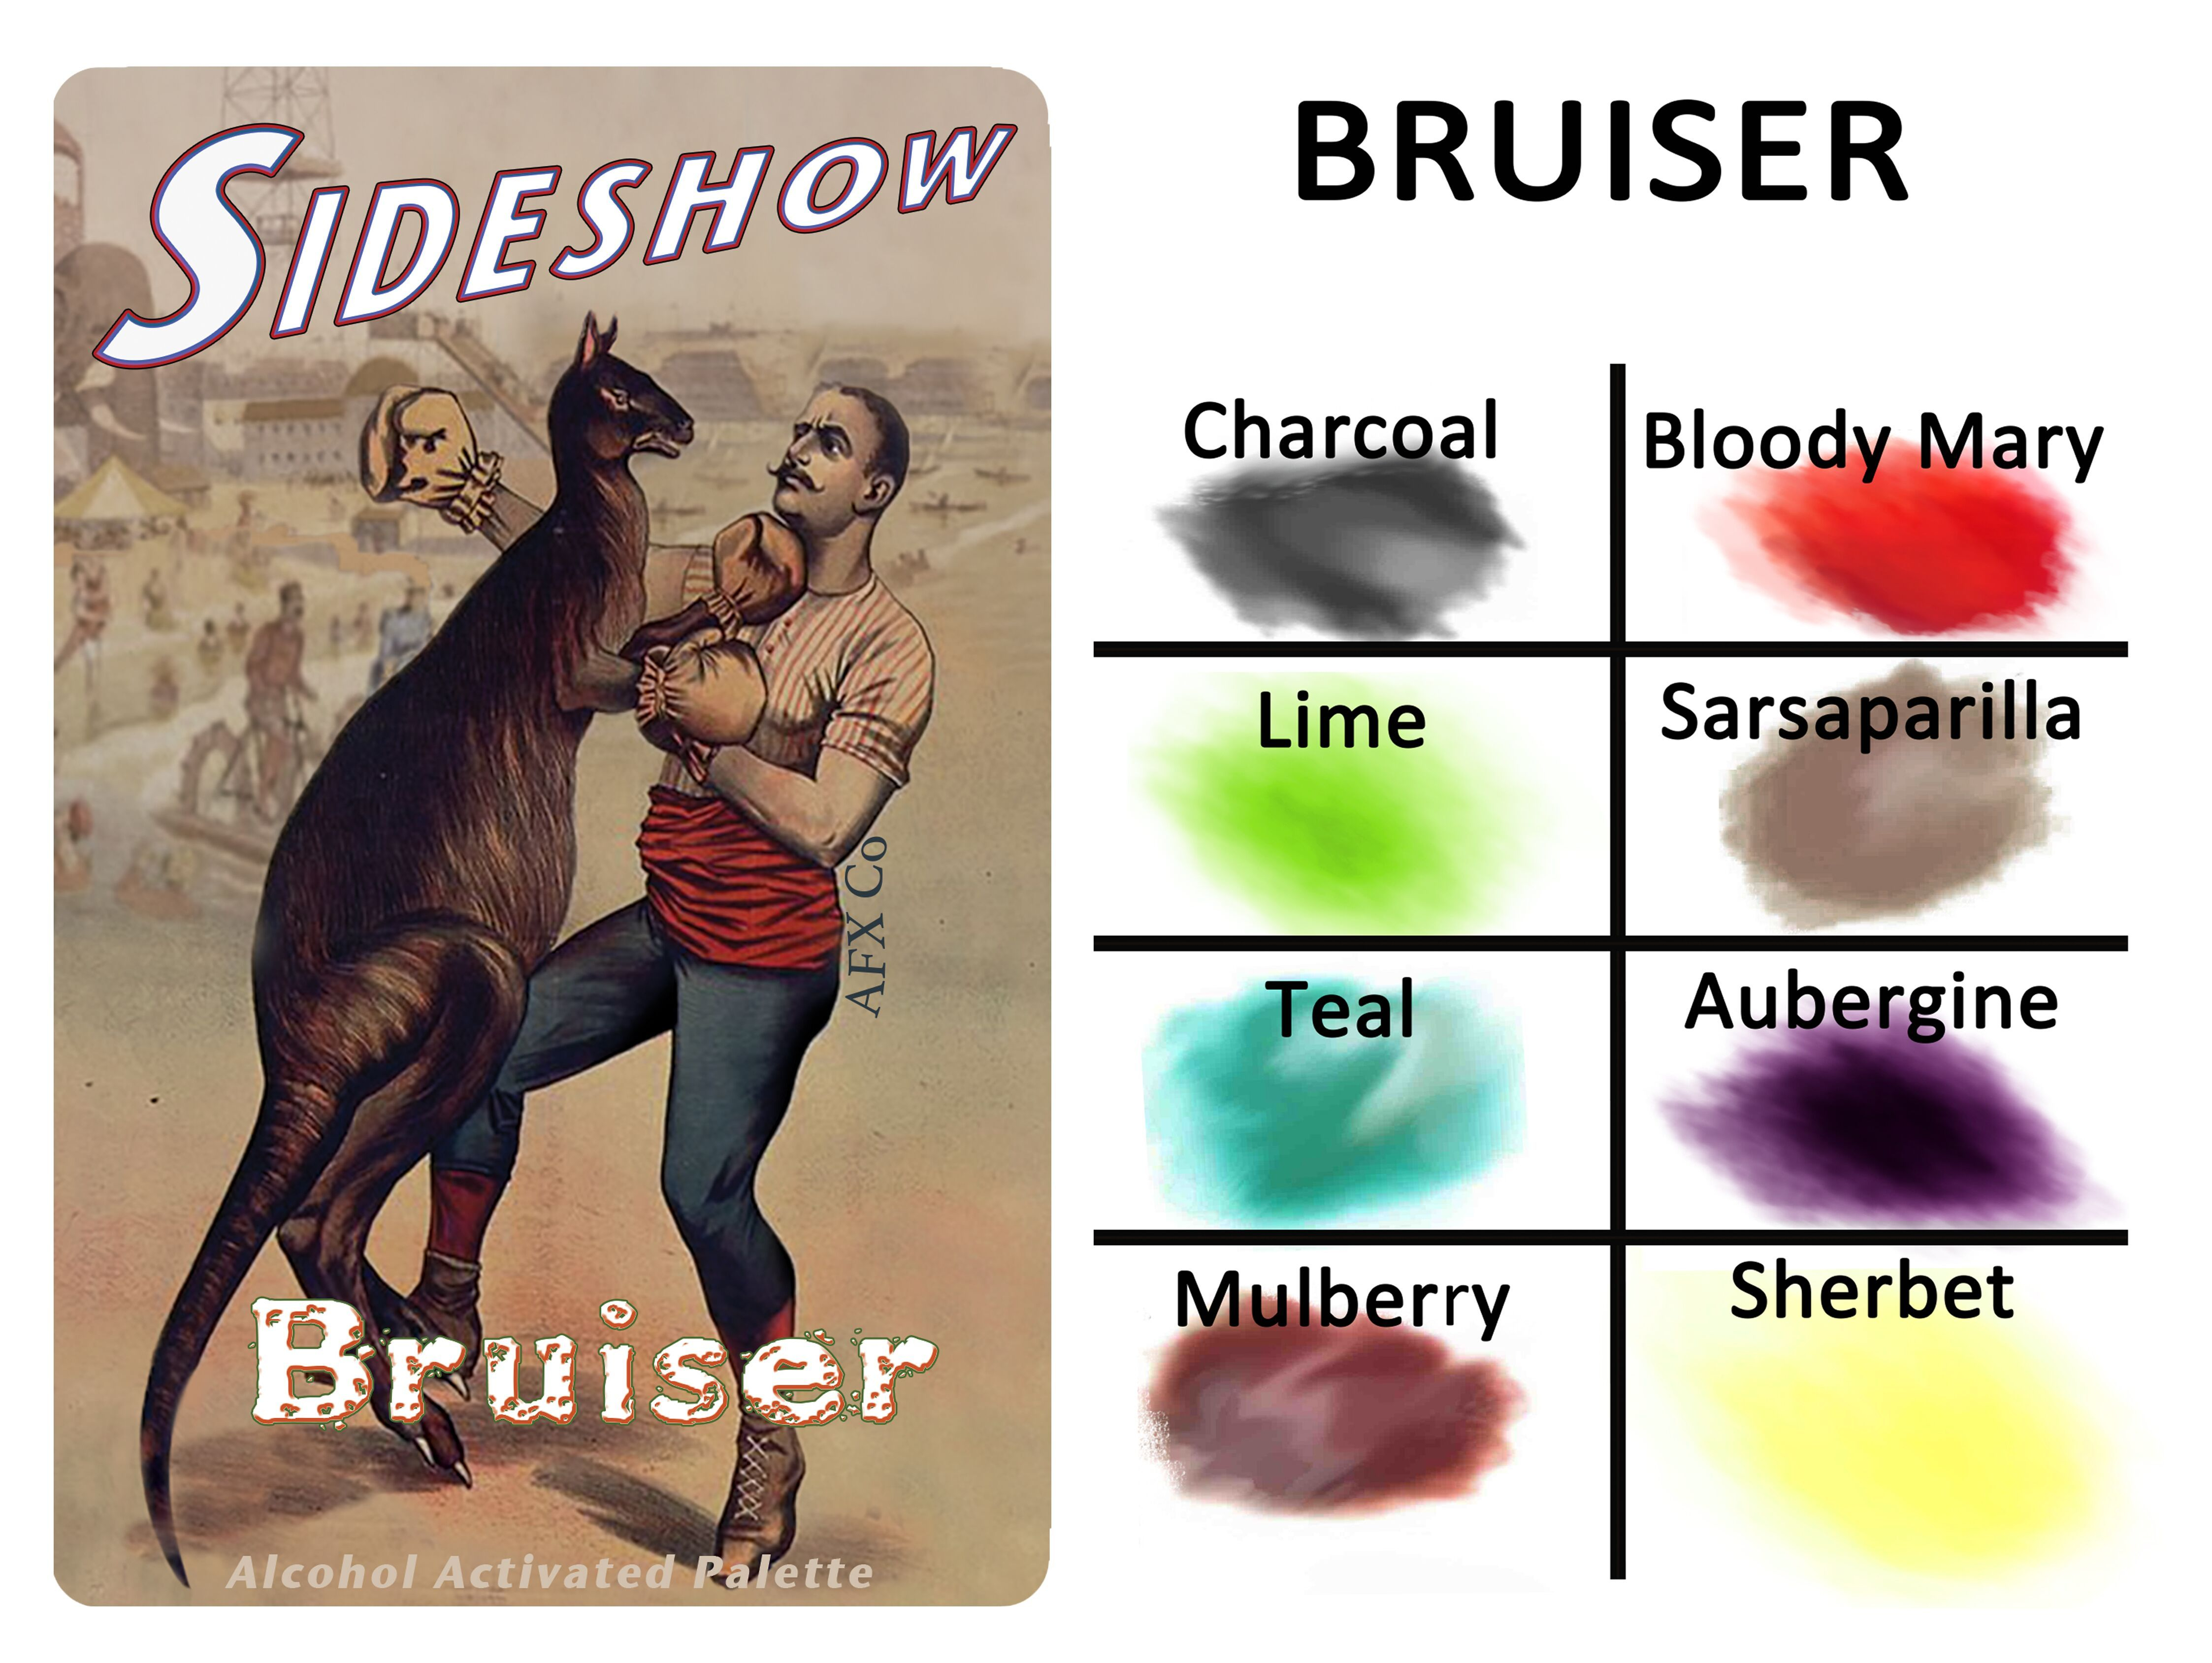 Sideshow Alcohol Activated Makeup Palette Bruiser